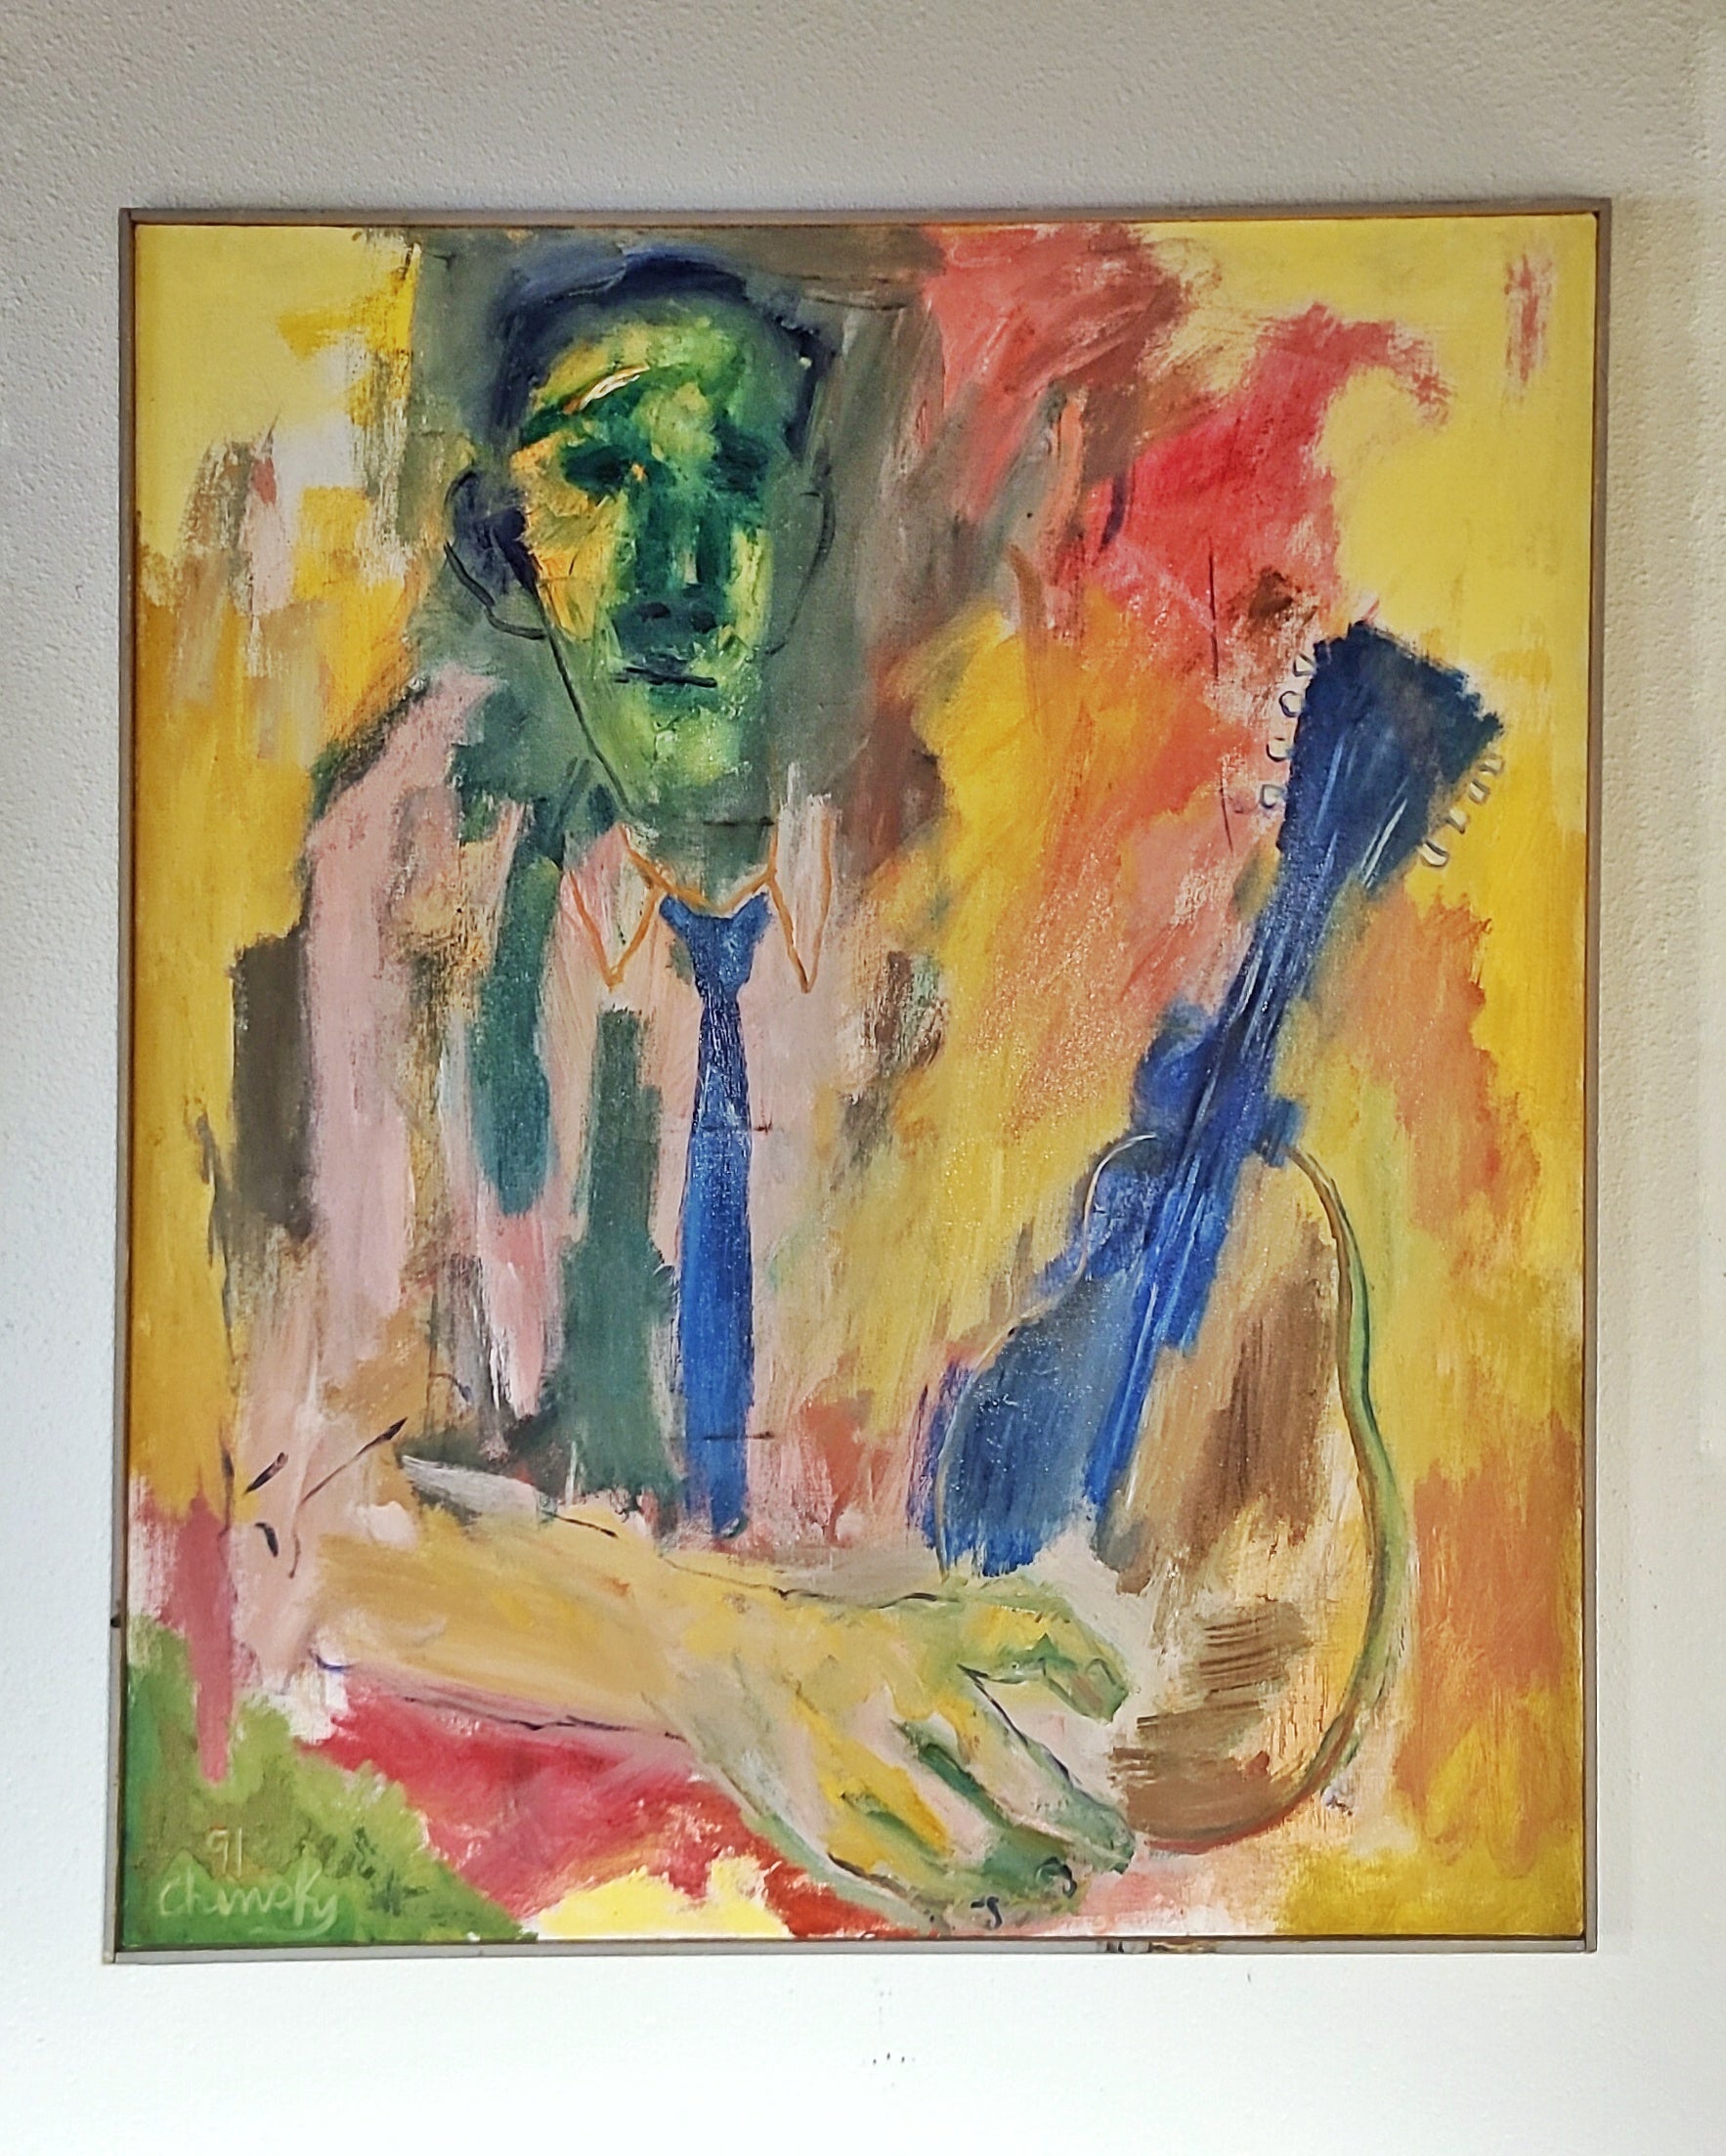 ‘SELF-TAUGHT MUSICIAN’ OIL ON CANVAS BY SHERMAN CHINSKY (1991)